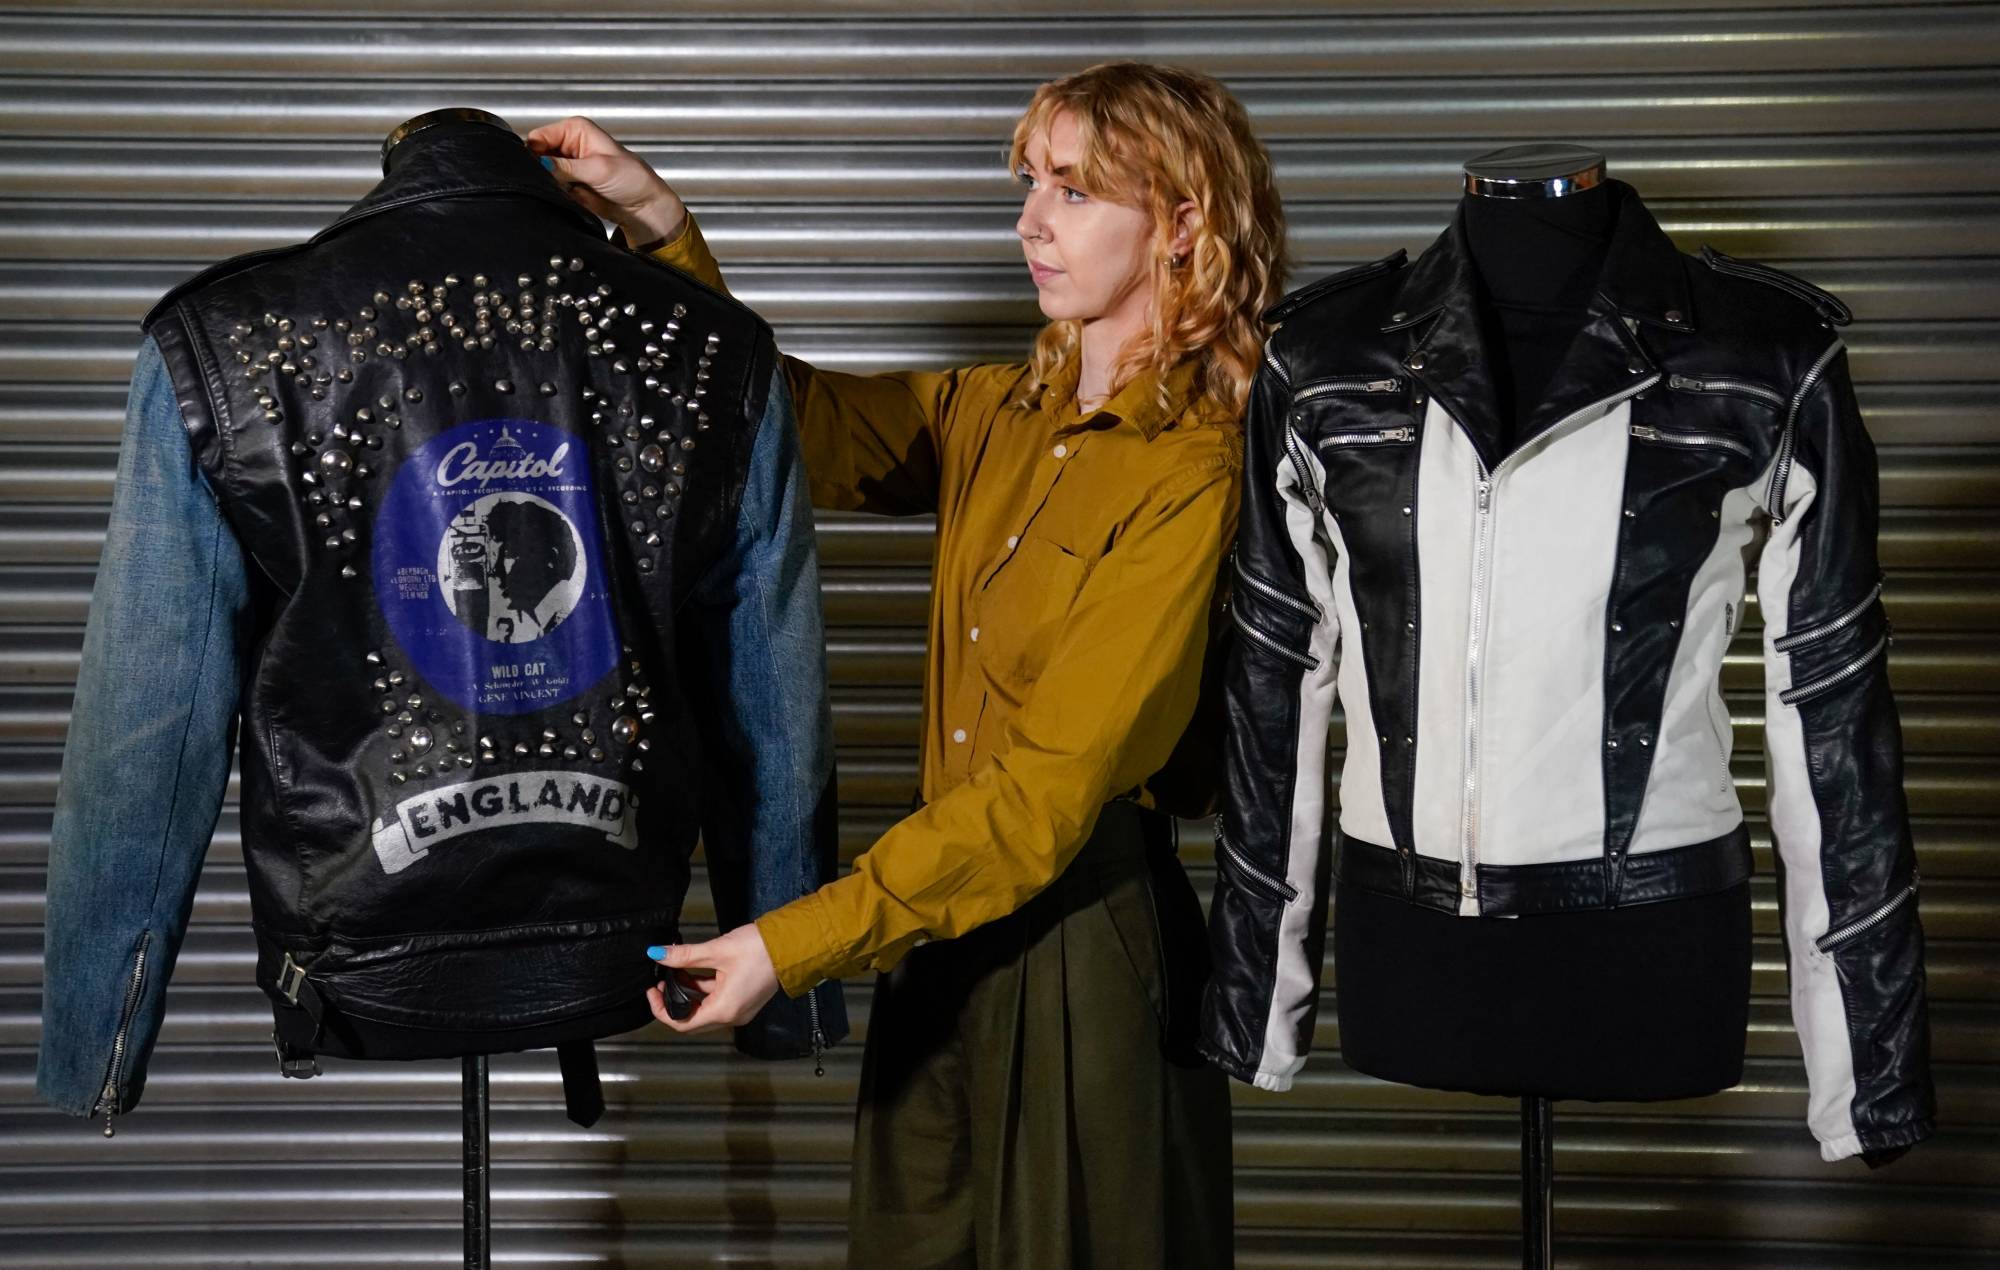 Michael Jackson jacket from 1984 Pepsi ad sells for £250,000 at auction